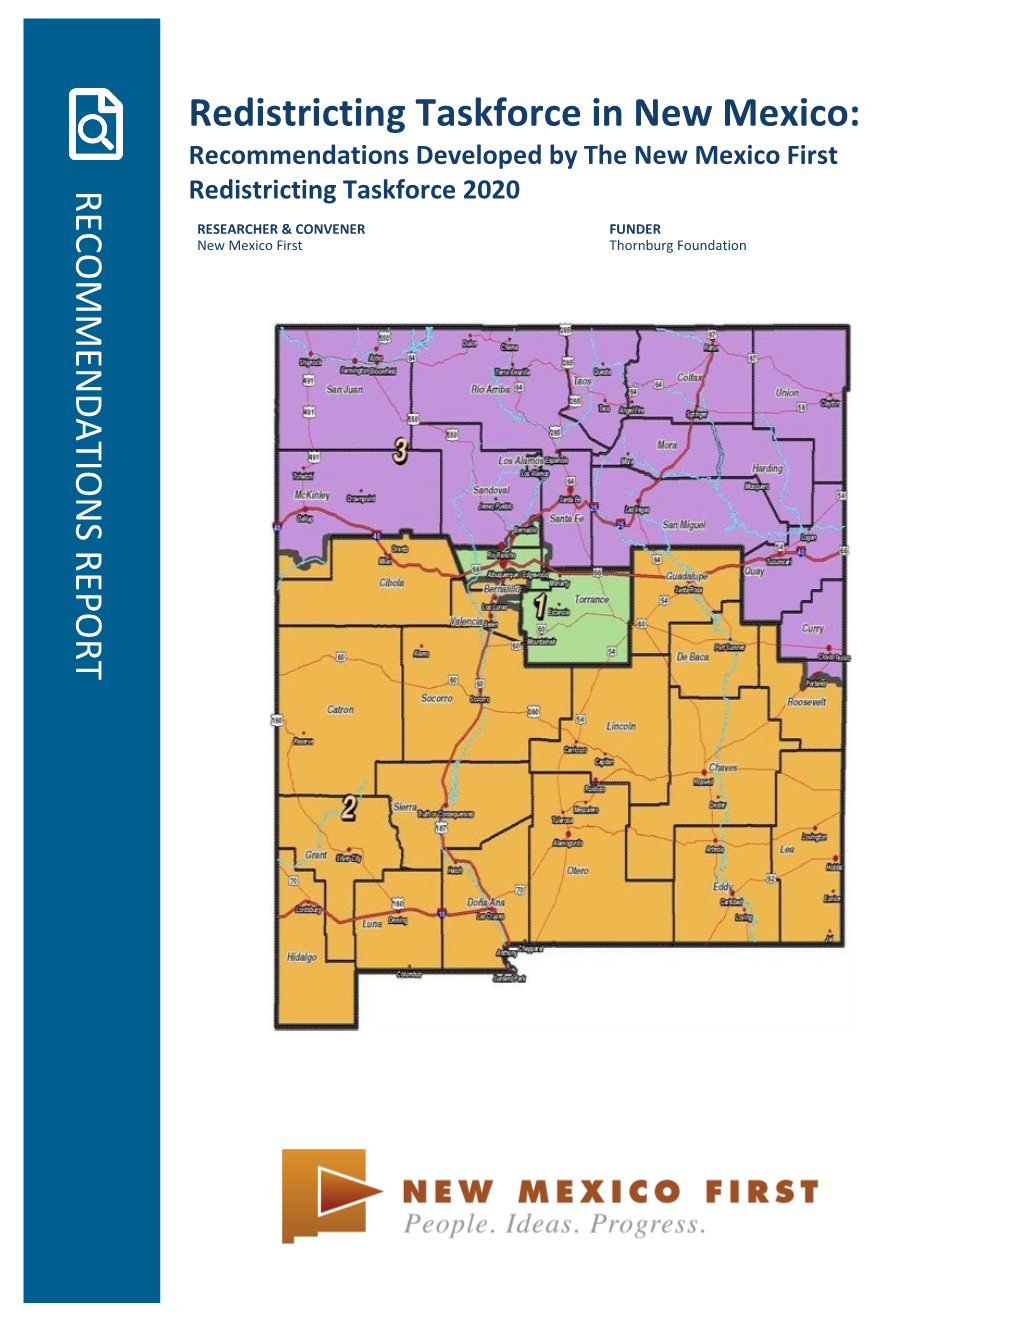 Redistricting Taskforce in New Mexico: Recommendations Developed by the New Mexico First RECOMMENDATIONS REPORT RECOMMENDATIONS Redistricting Taskforce 2020